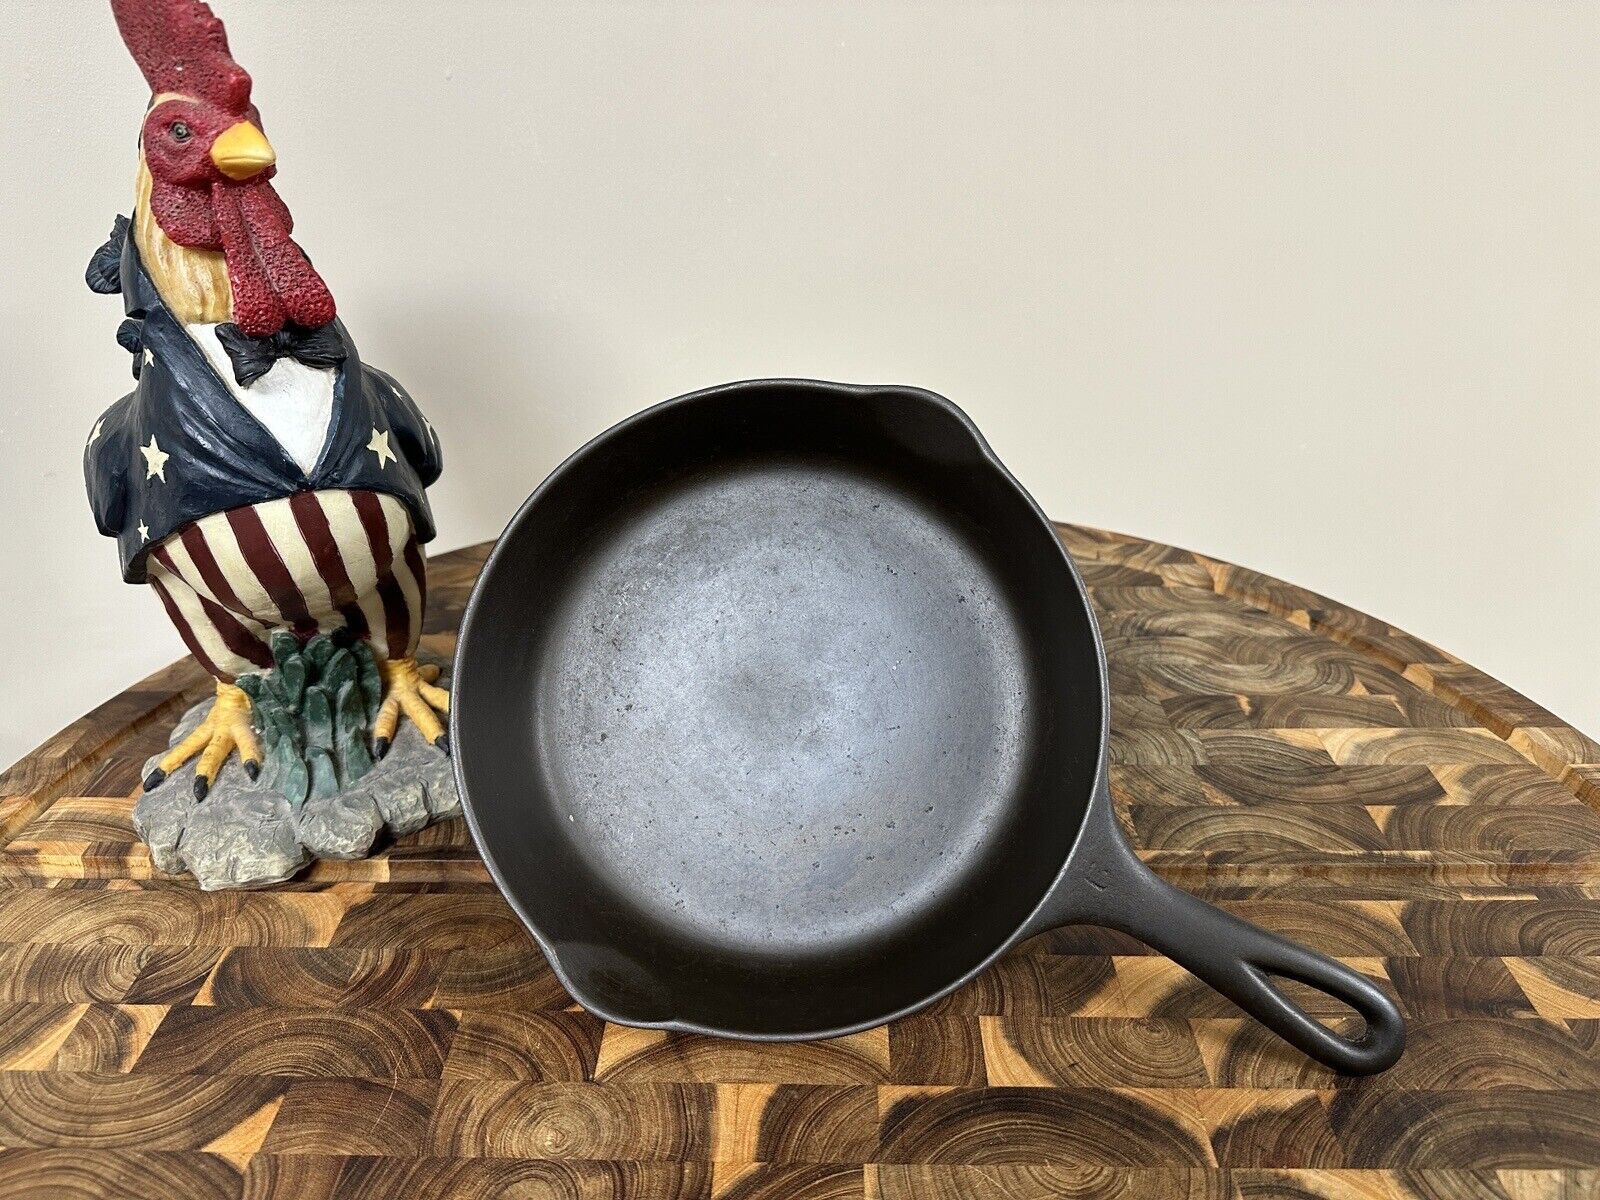 Wagner #6 (9”) Cast Iron Skillet 1056 R, Meticulously Restored, Ready to Use